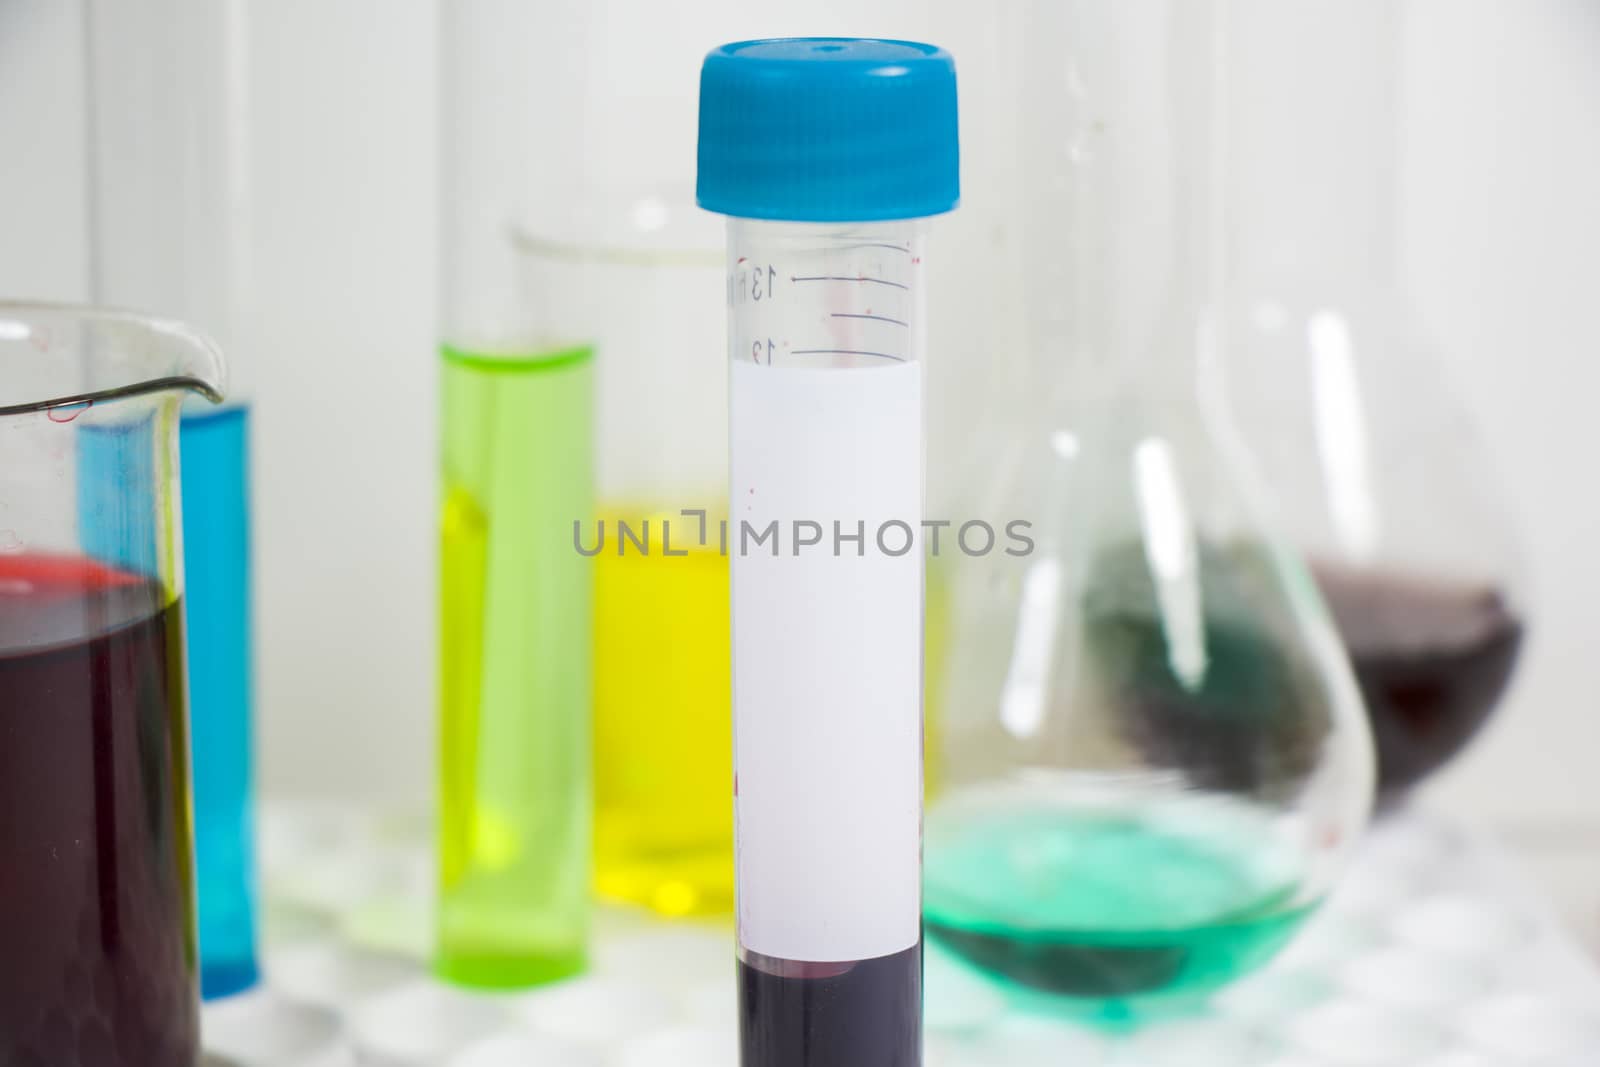 Blood test tube sample without name, empty space for text, laboratory background by Taidundua